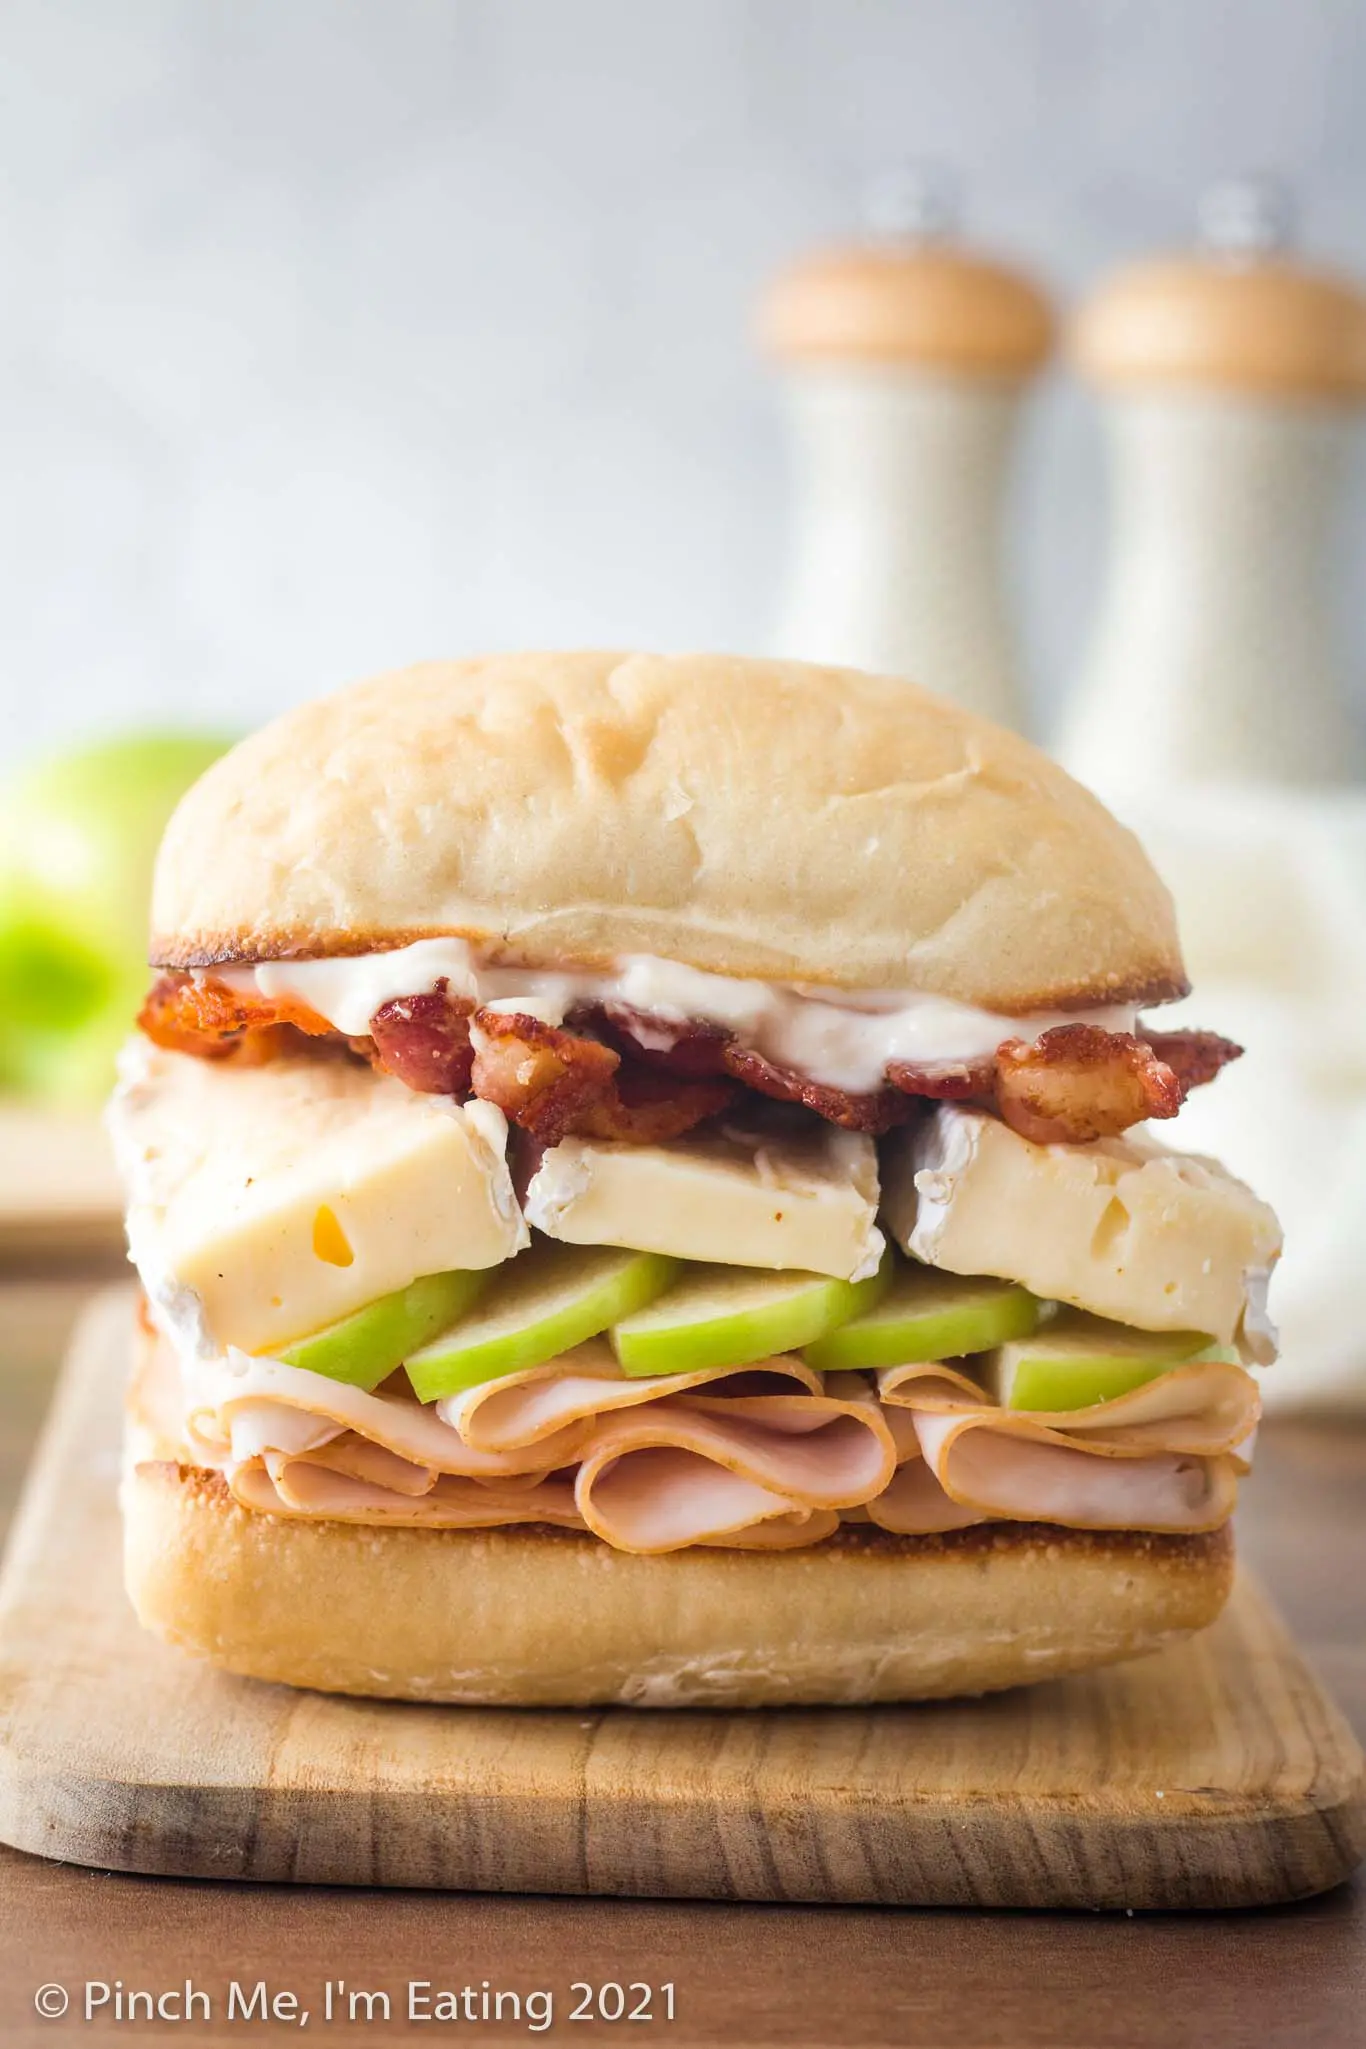 A sandwich sitting on a wooden cutting board is layered on a ciabatta roll with smoked deli turkey, green granny smith apple, brie cheese, bacon, and garlic mayo.